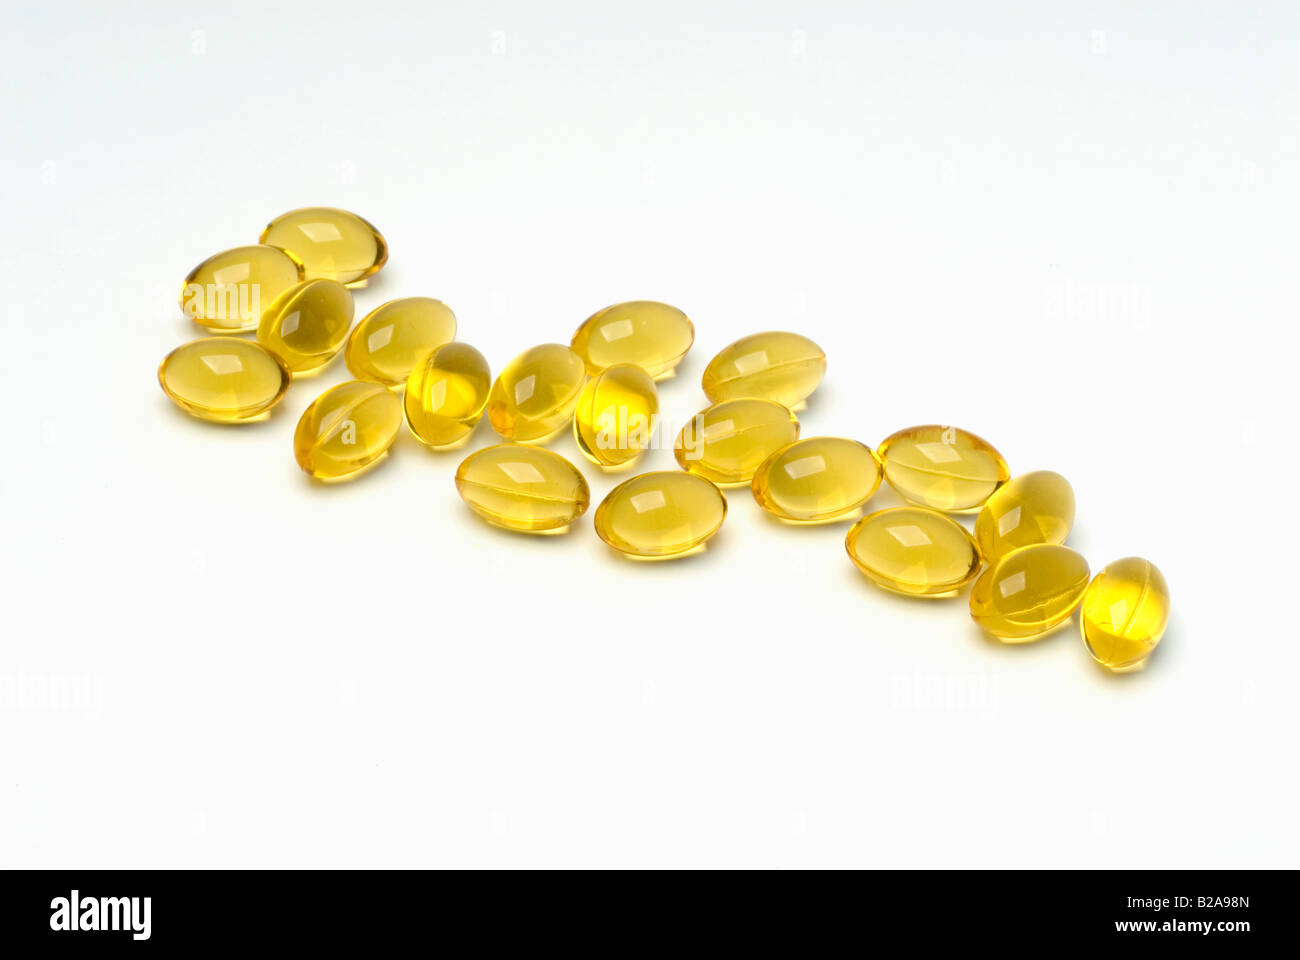 Omega-3 and Omega-6 liquid vitamin supplement capsules for nutrition and brain and eye function Stock Photo